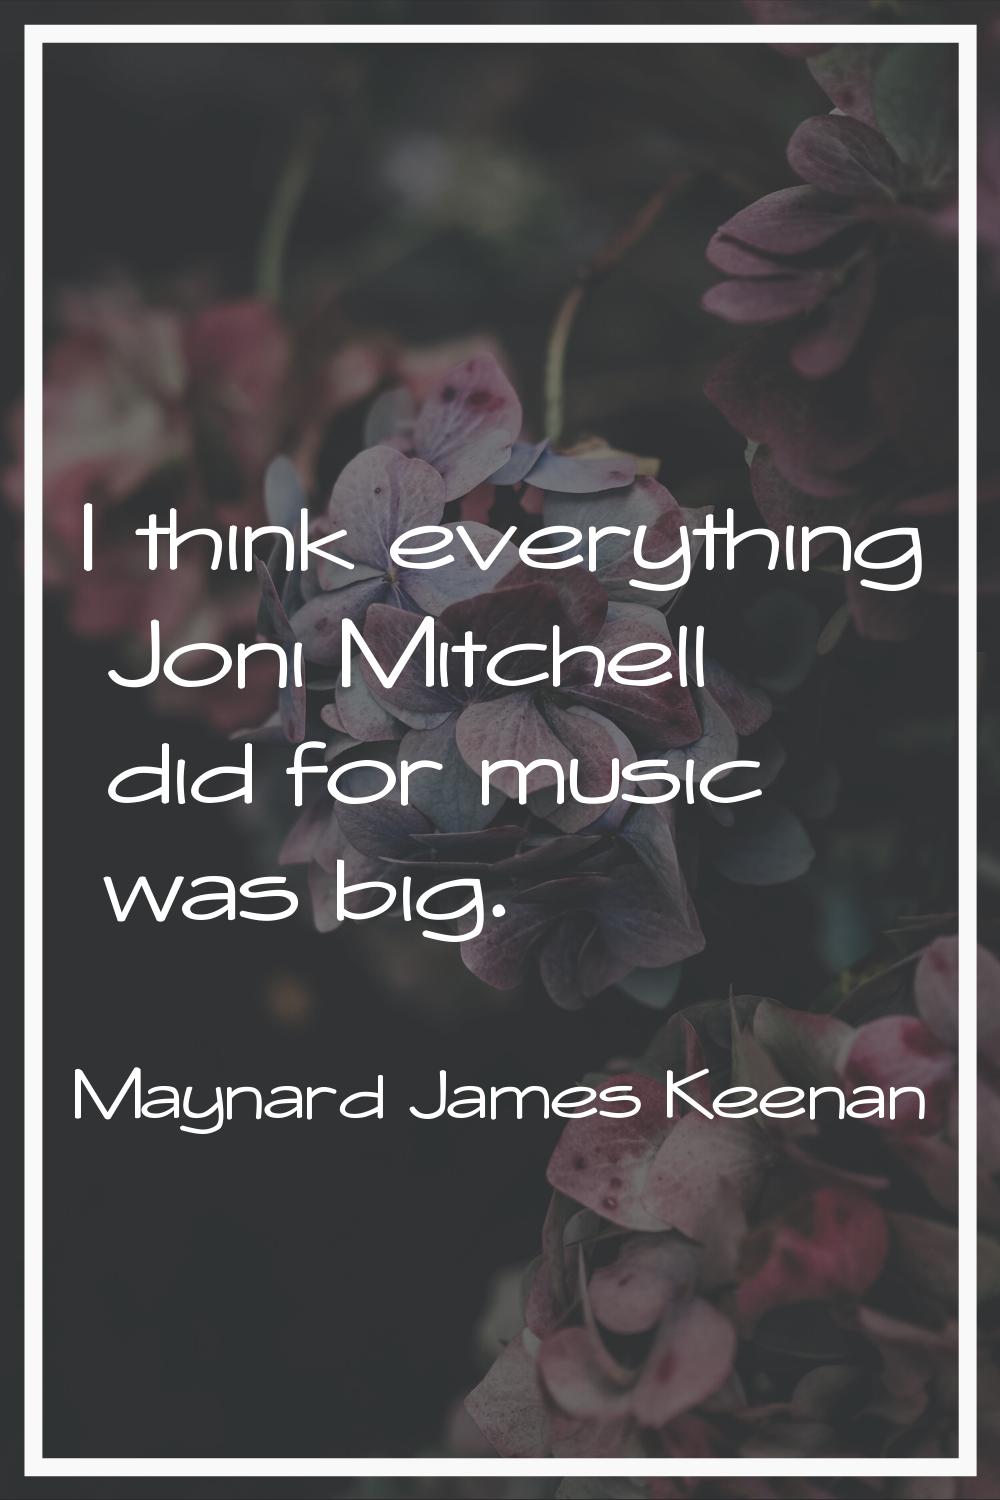 I think everything Joni Mitchell did for music was big.